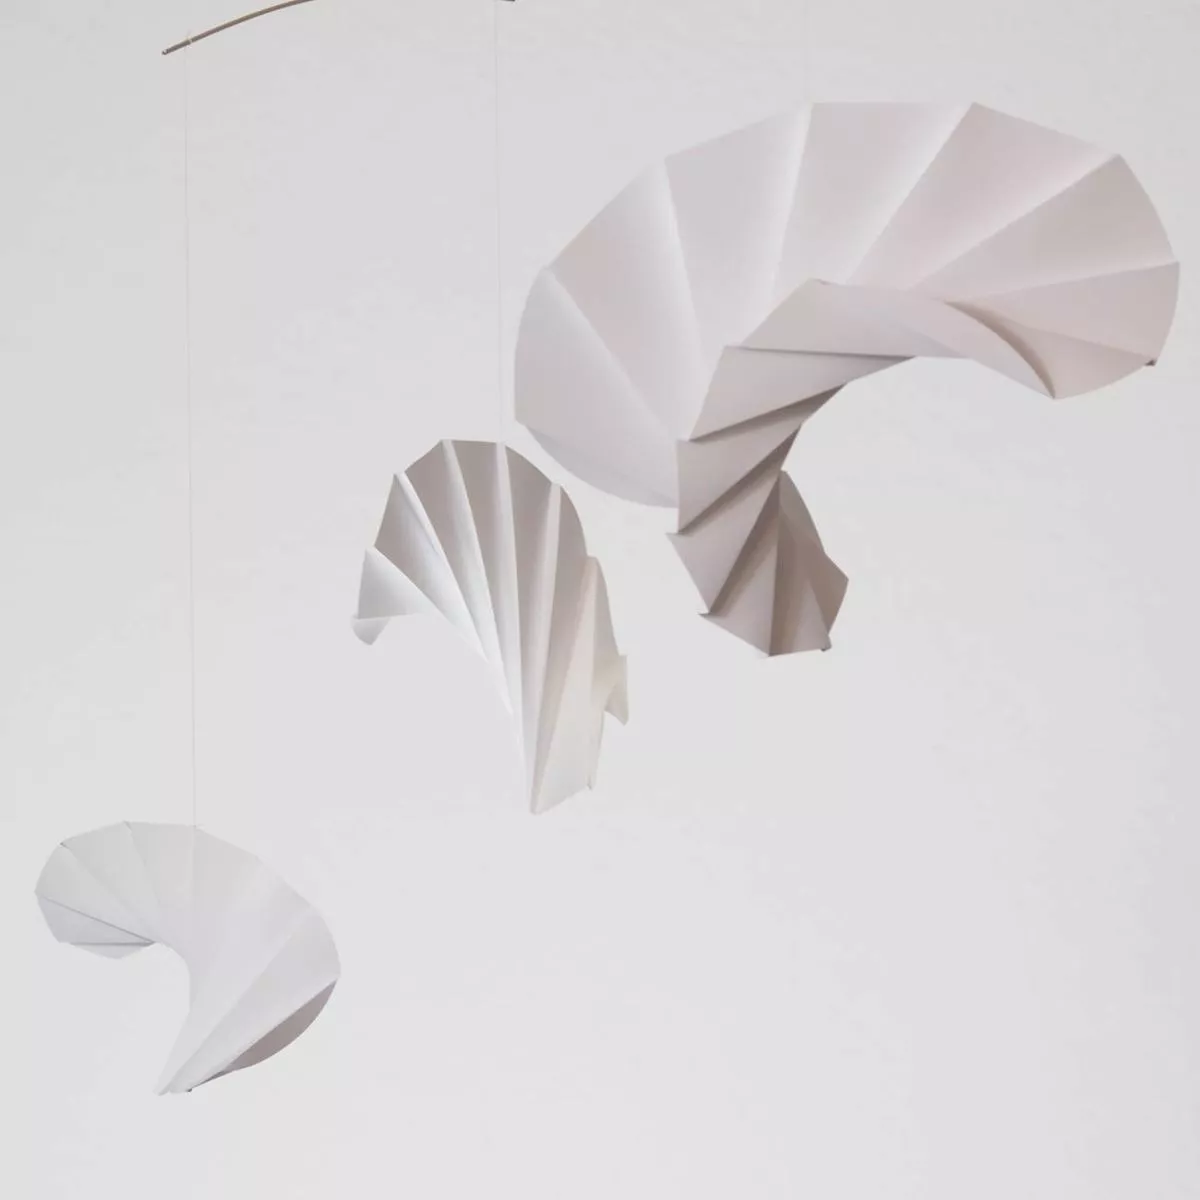 Geometrical Mobile "Waves" with White Elements (two sizes)